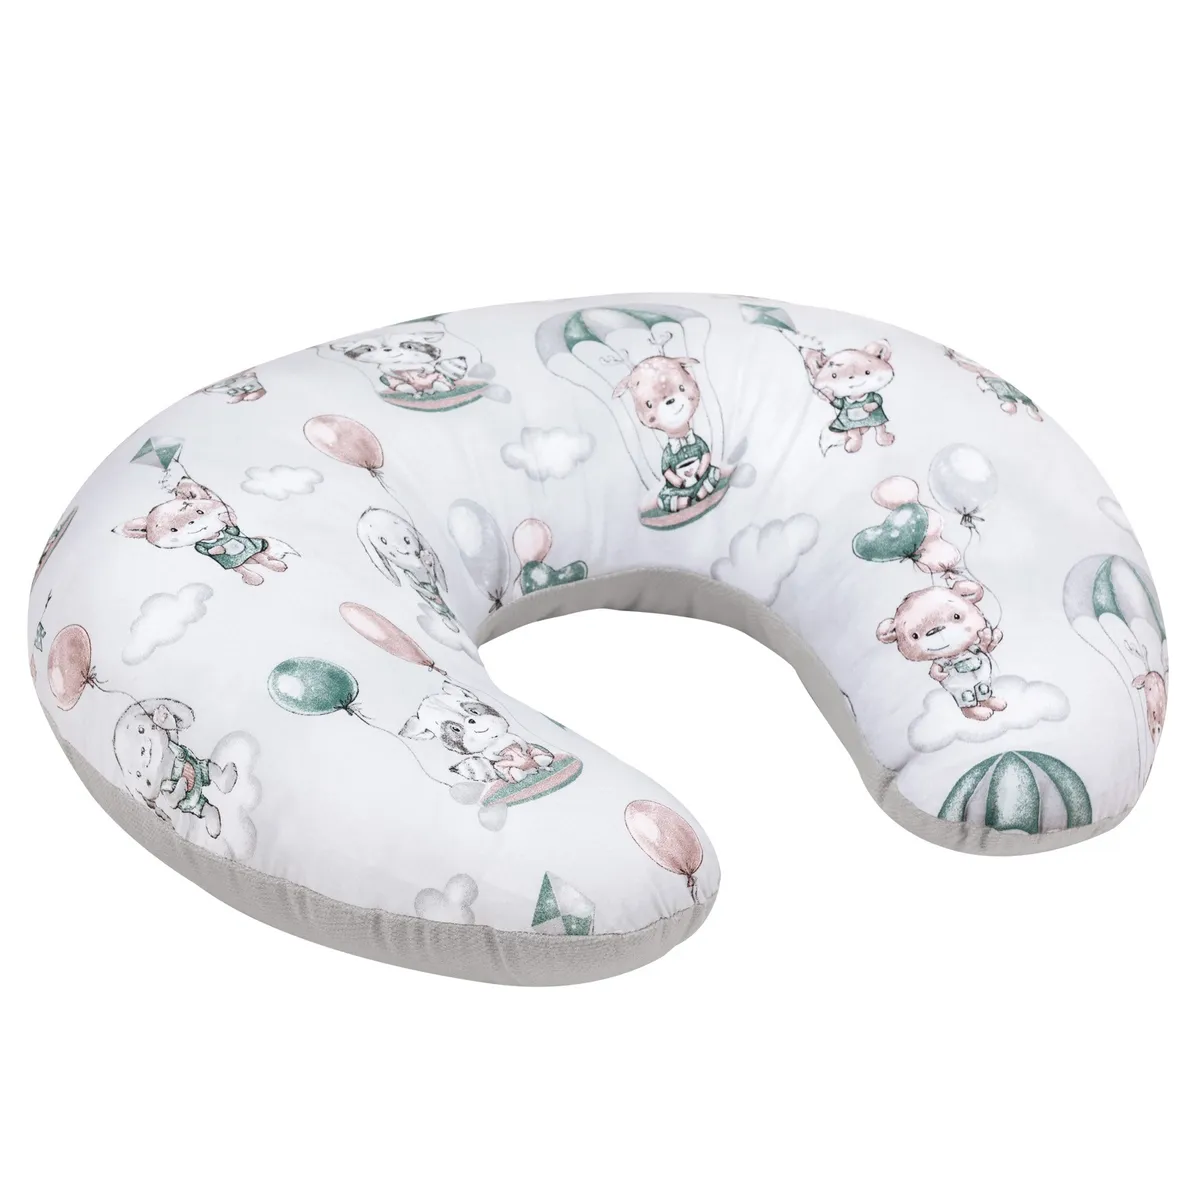 Nursing, feeding pillow 60×40 cm Loom with removable cover